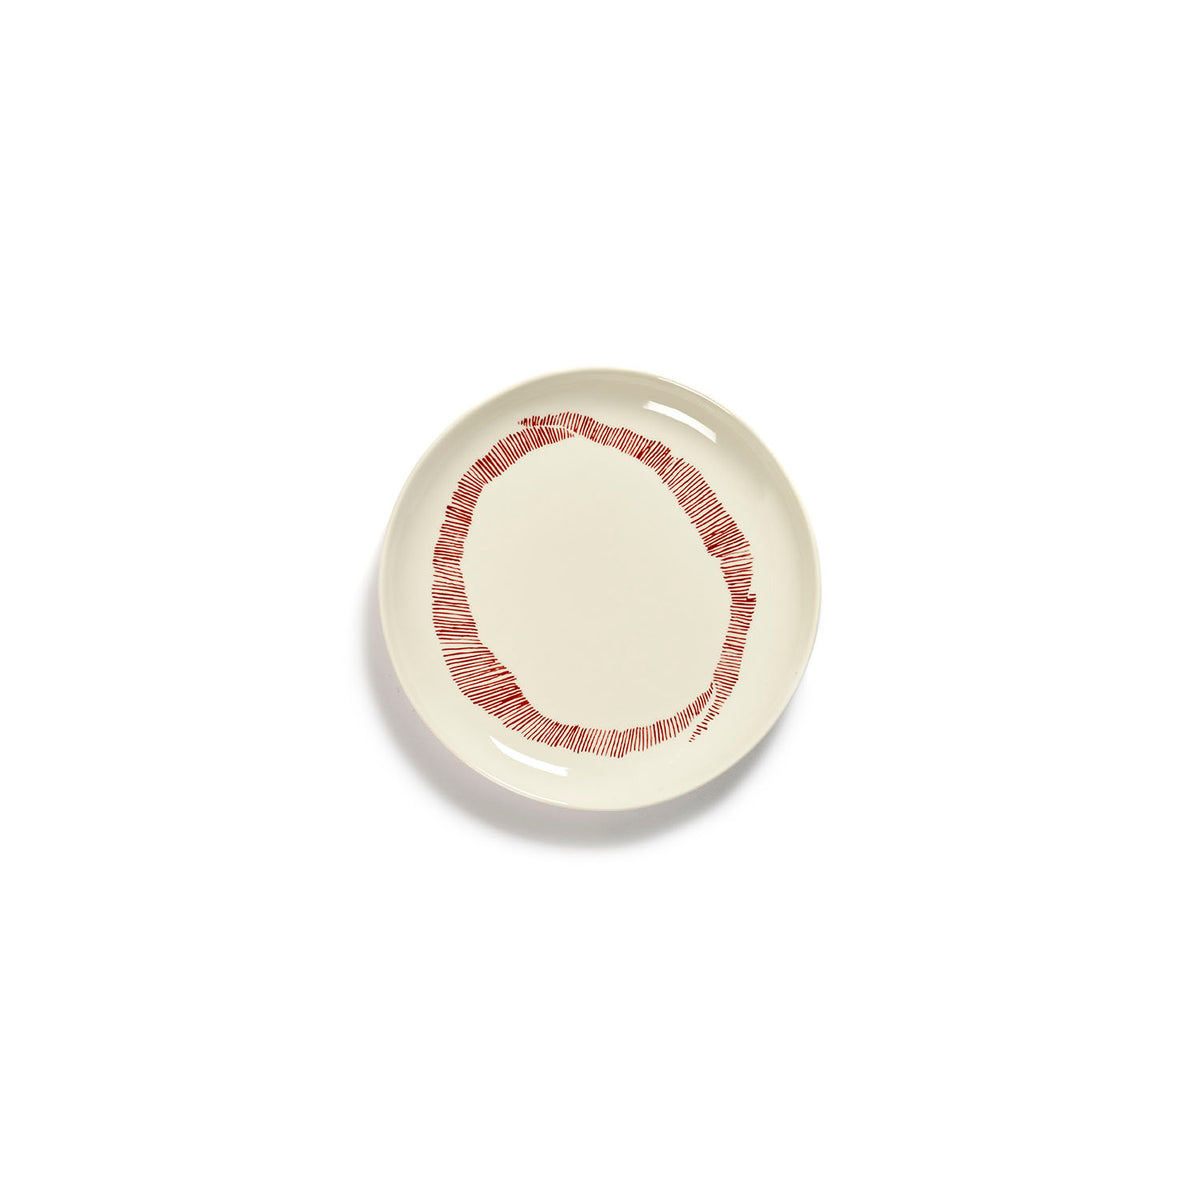 Ottolenghi for Serax Feast collection; small plate, with white swirl-stripes red design.